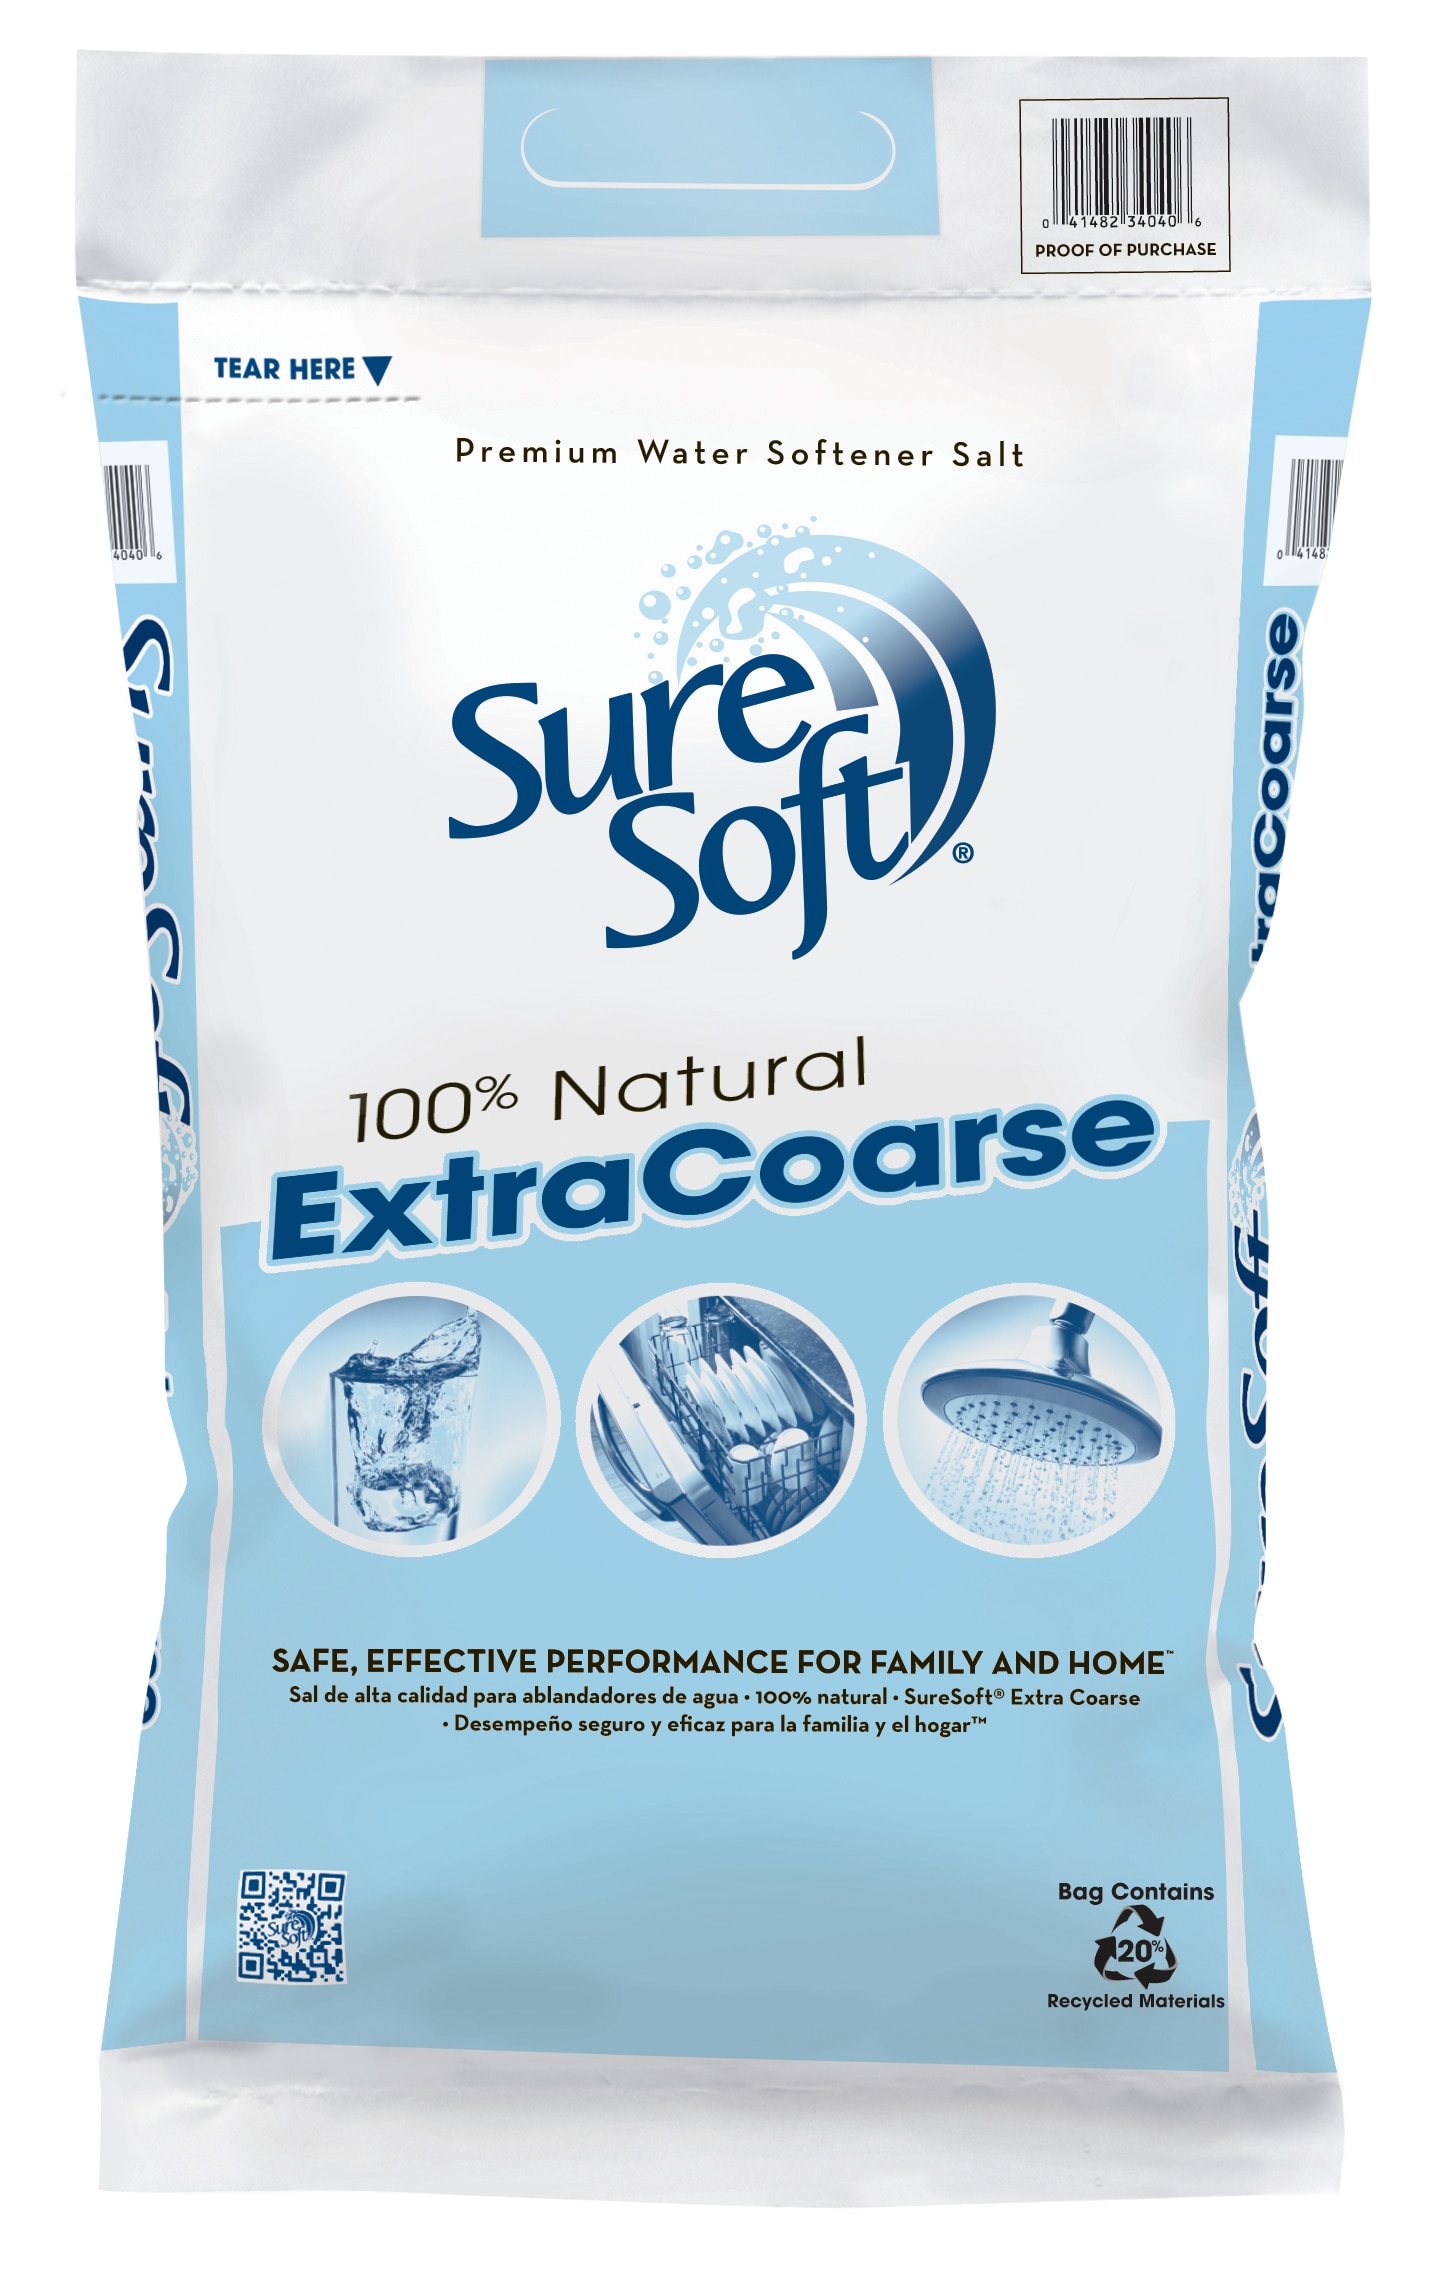 Can You Use Water Softener Salt To Melt Ice? - DROP